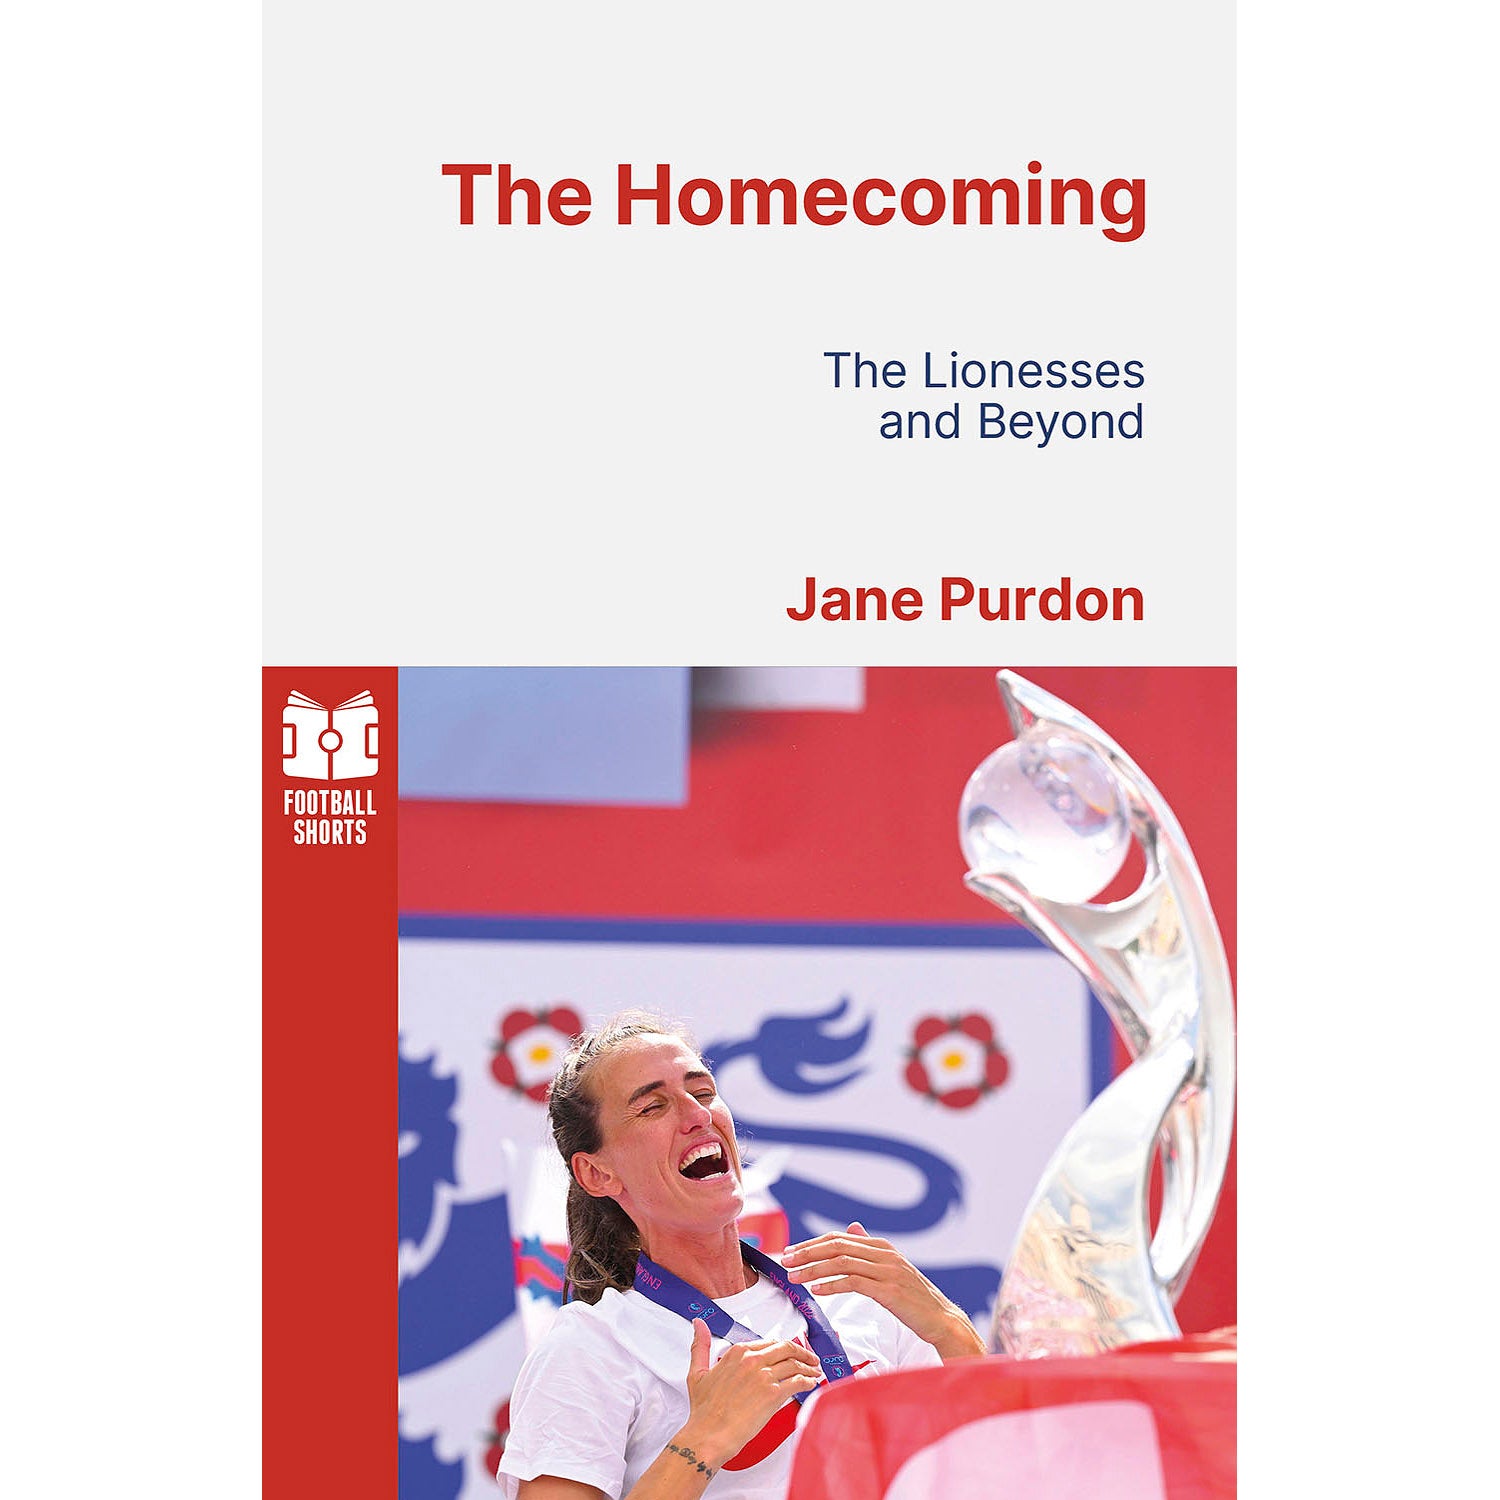 The Homecoming – The Lionesses and Beyond